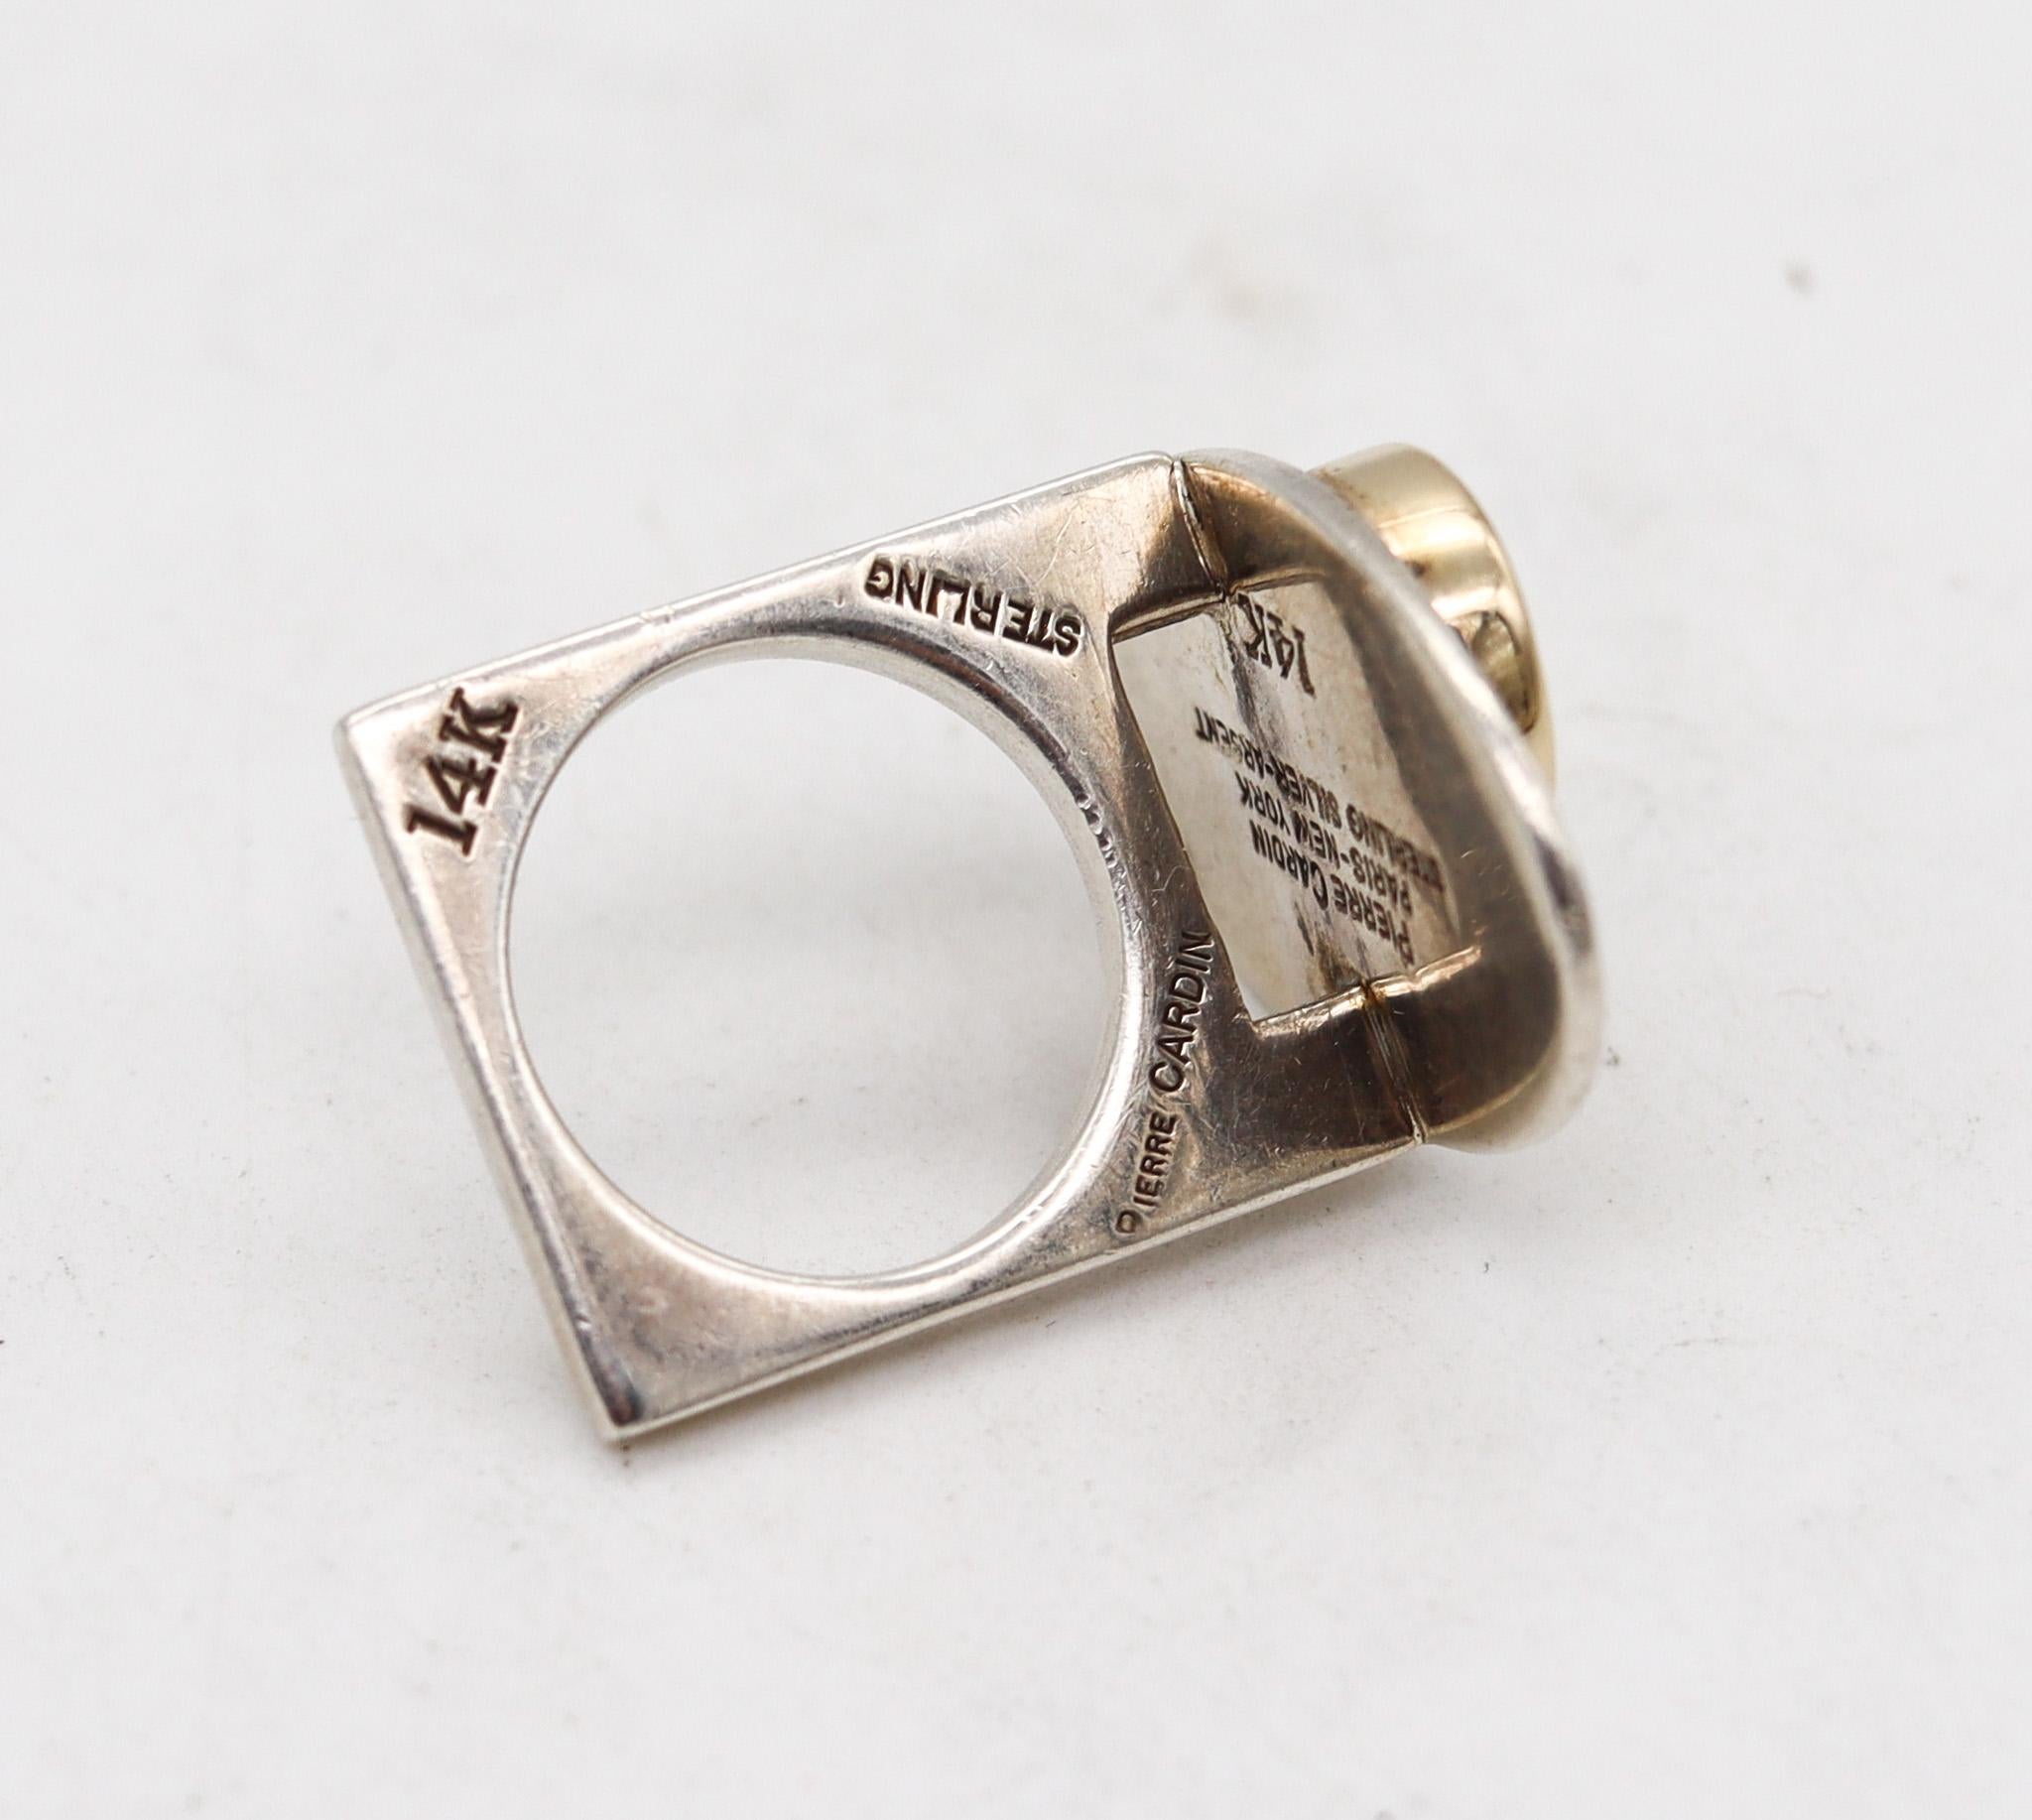 Geometric ring designed by Dinh Van for Pierre Cardin.

Sculptural modernist piece, created in France by the Parisian fashion designer Pierre Cardin, back in the 1970. This geometric sculptural ring has been crafted with minimalist patterns in solid